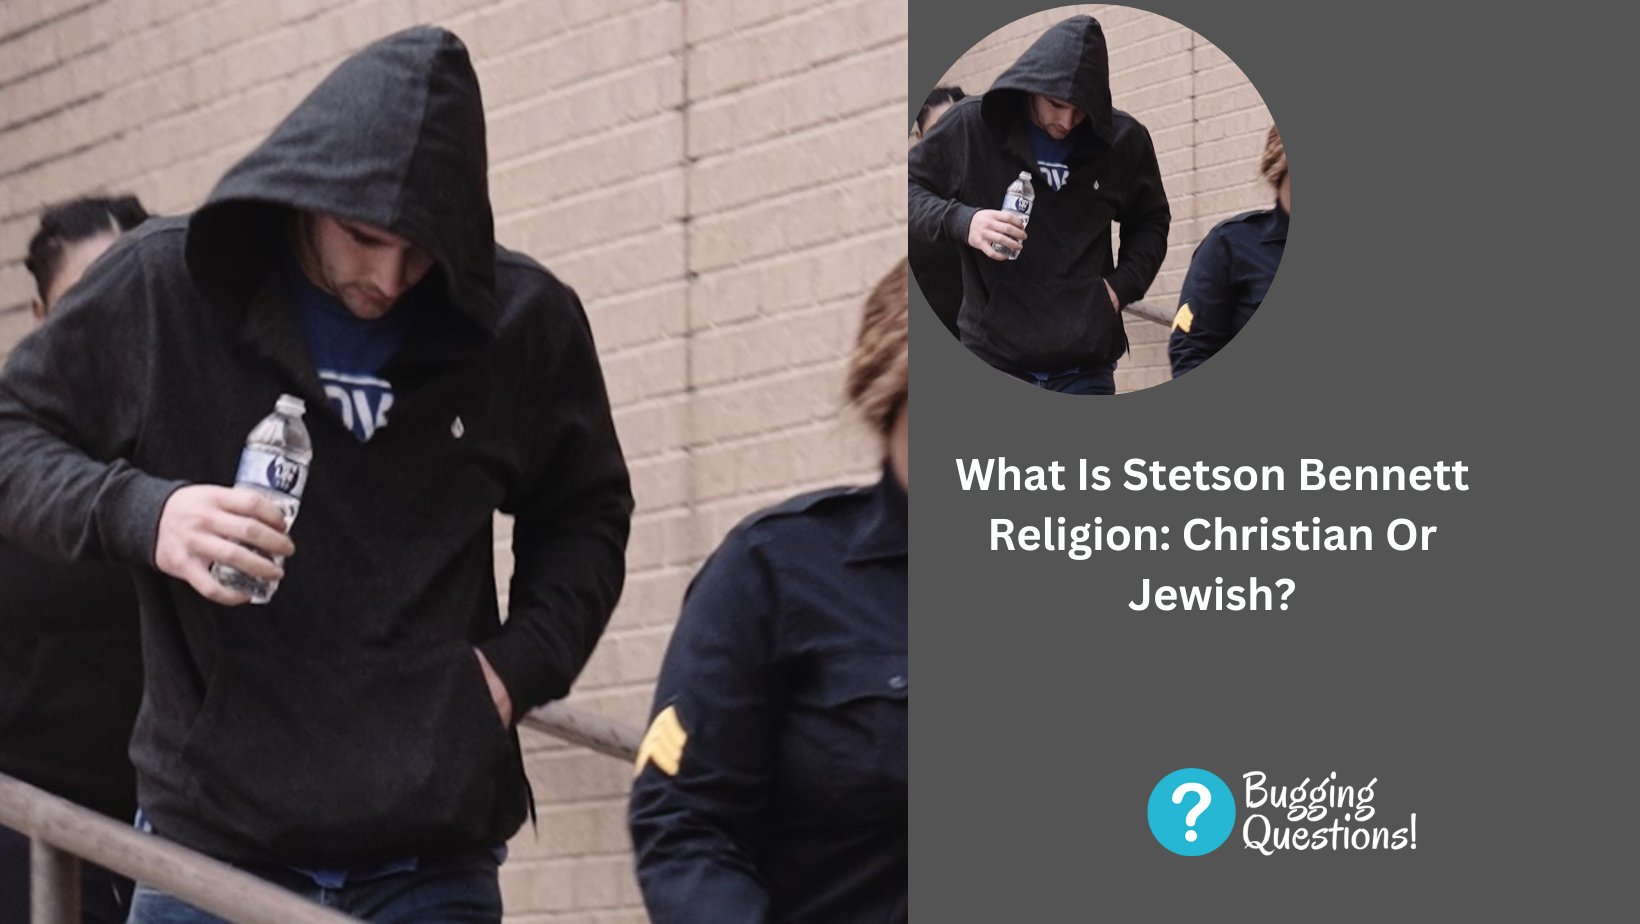 What Is Stetson Bennett Religion: Christian Or Jewish?